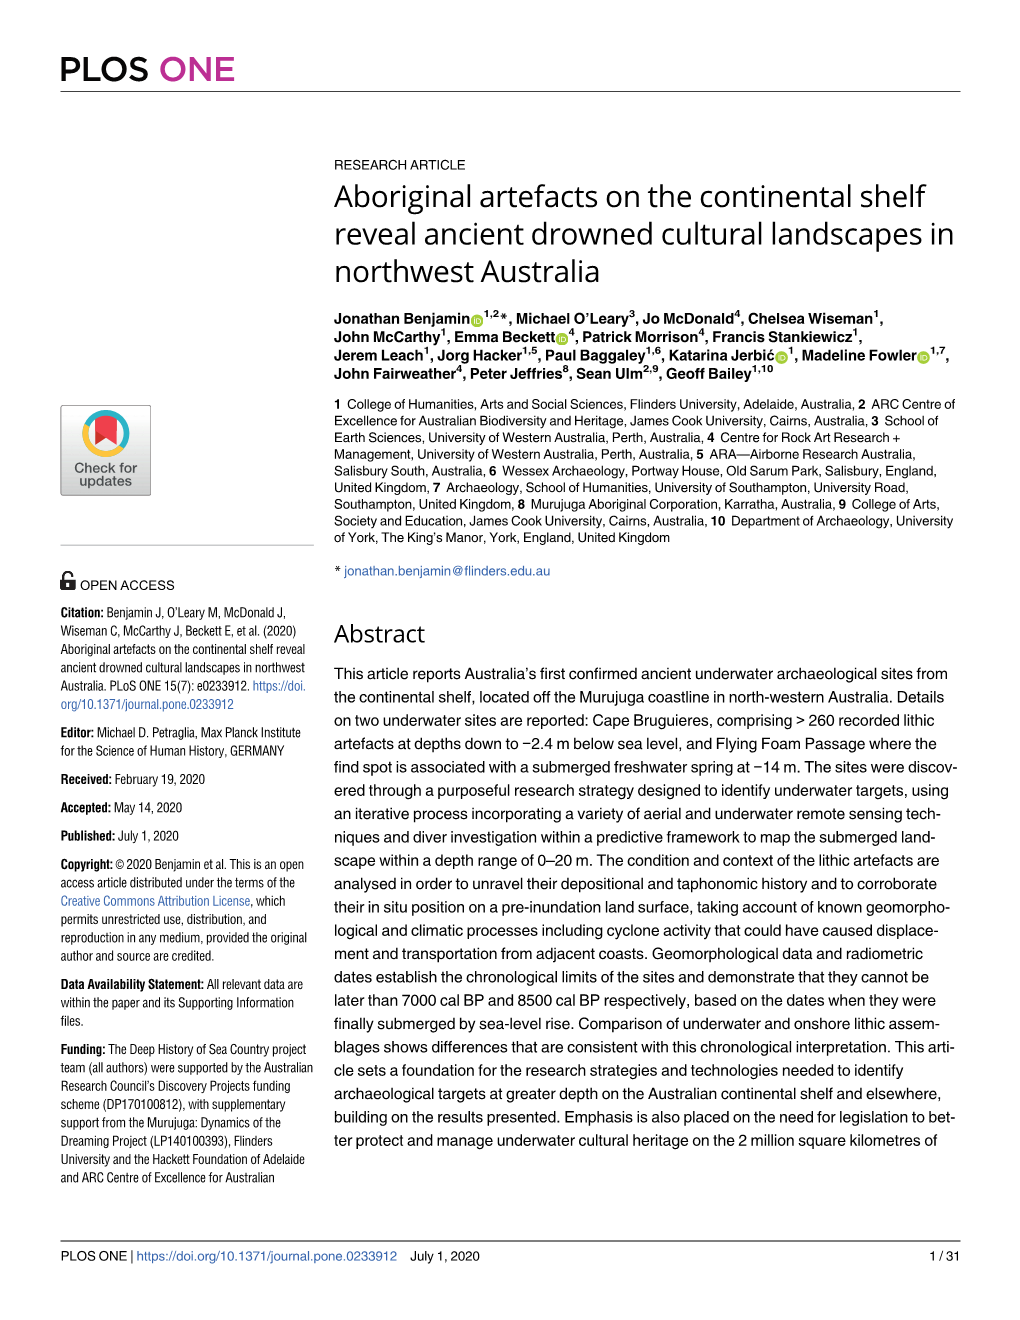 Aboriginal Artefacts on the Continental Shelf Reveal Ancient Drowned Cultural Landscapes in Northwest Australia